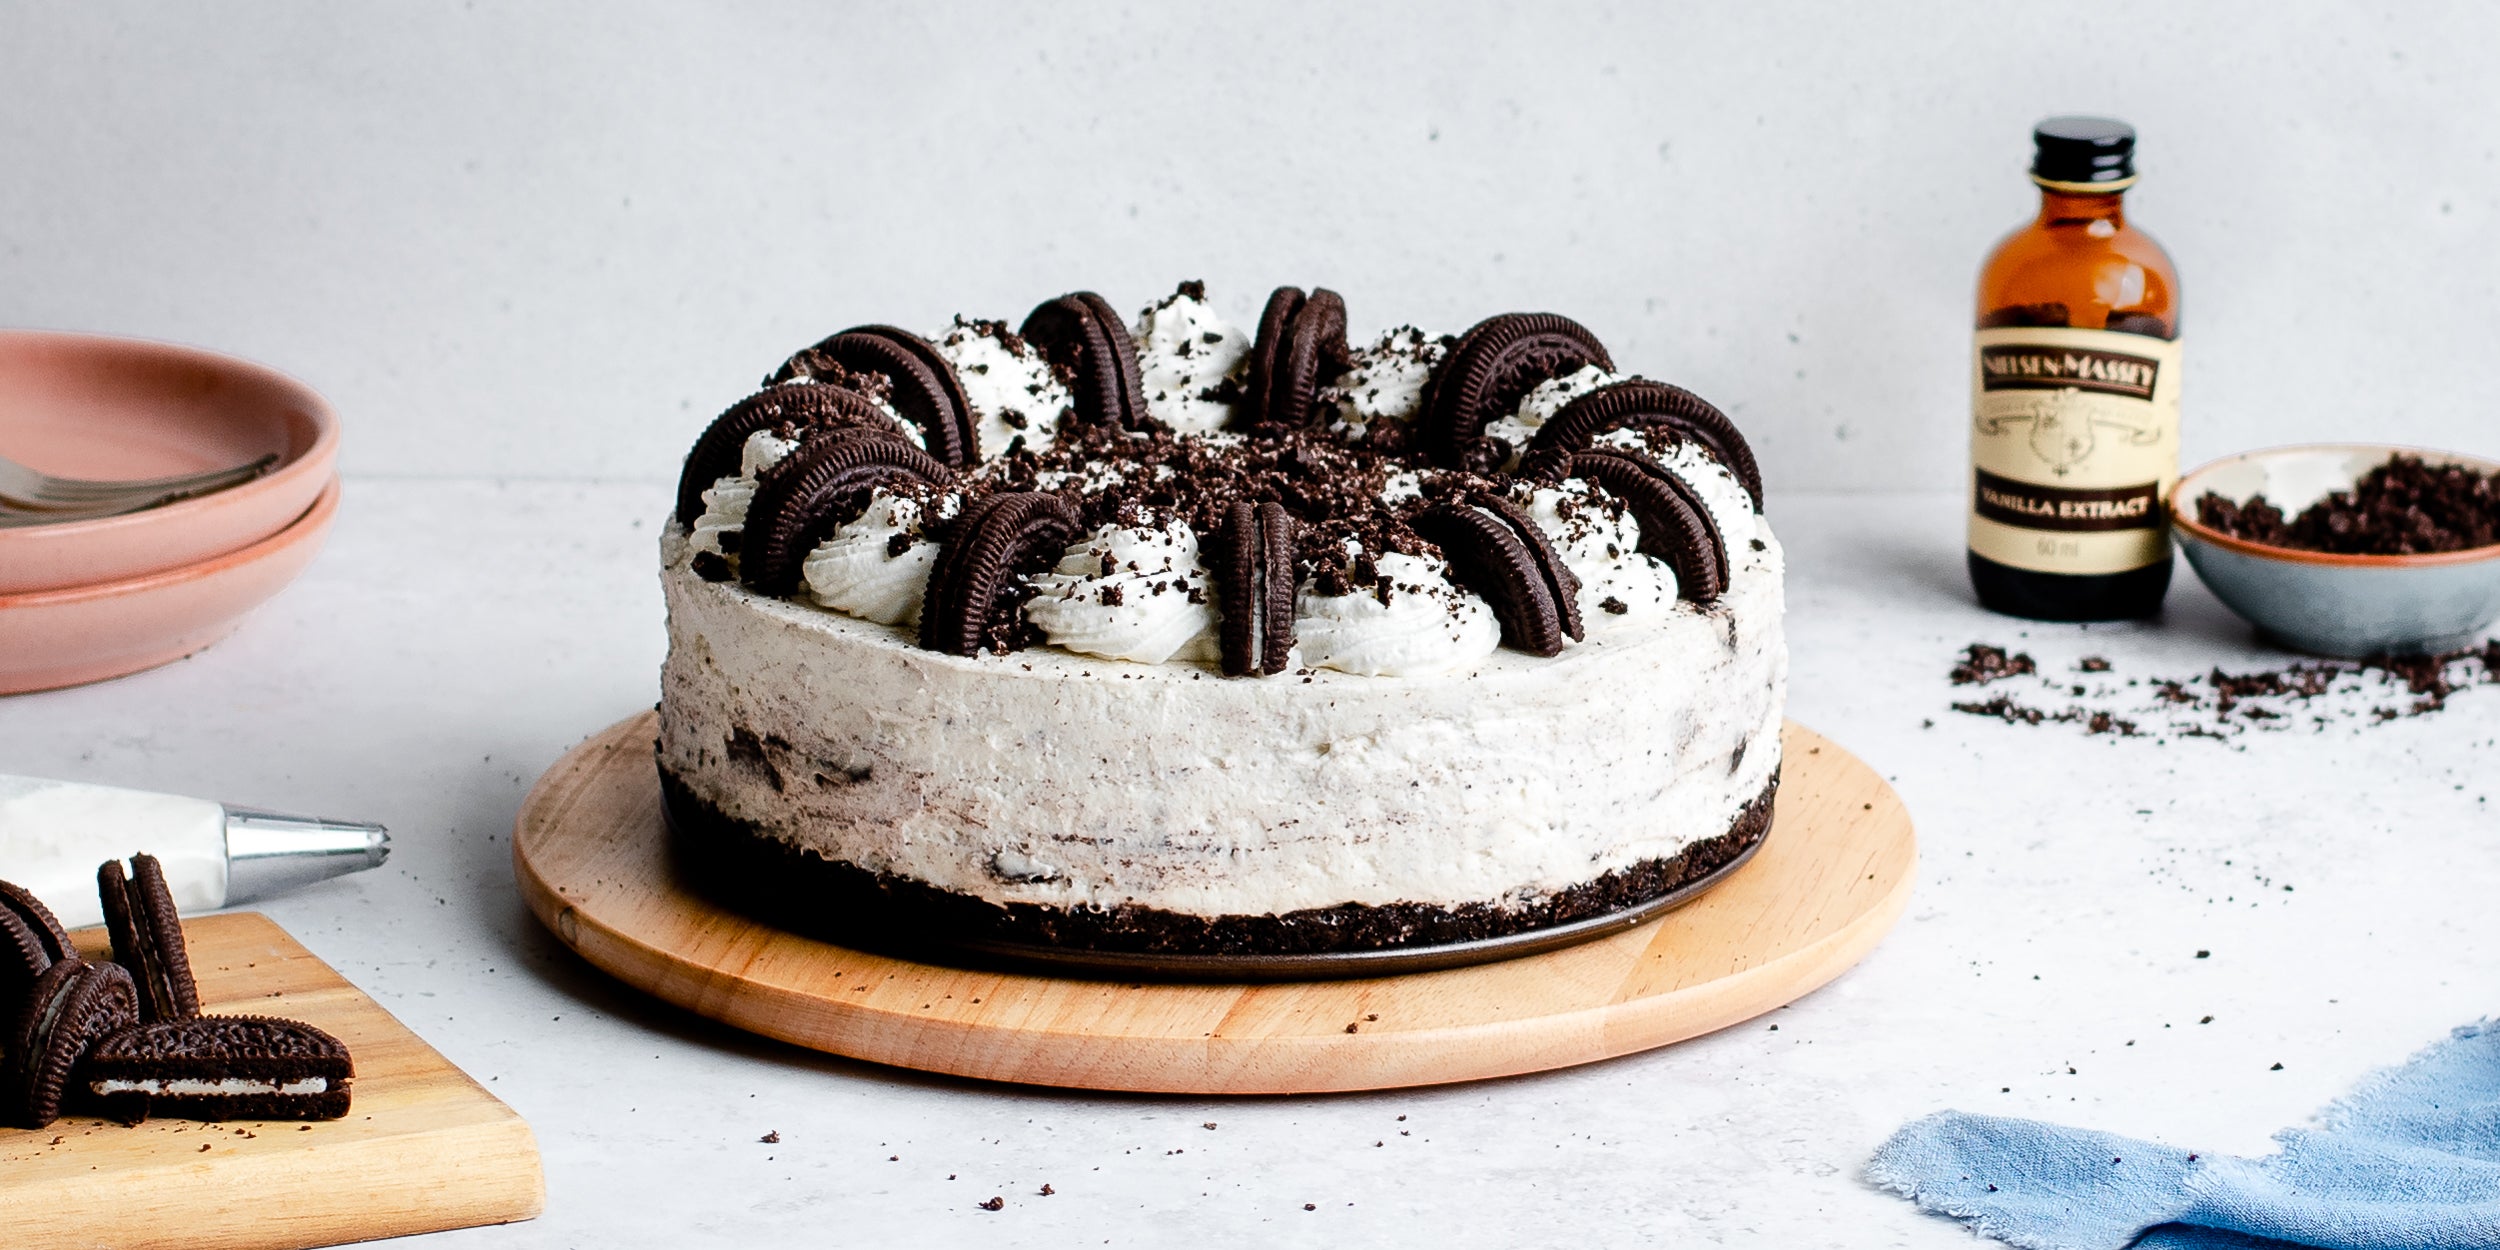 Oreo cheesecake on circular wooden board with vanilla extract in background